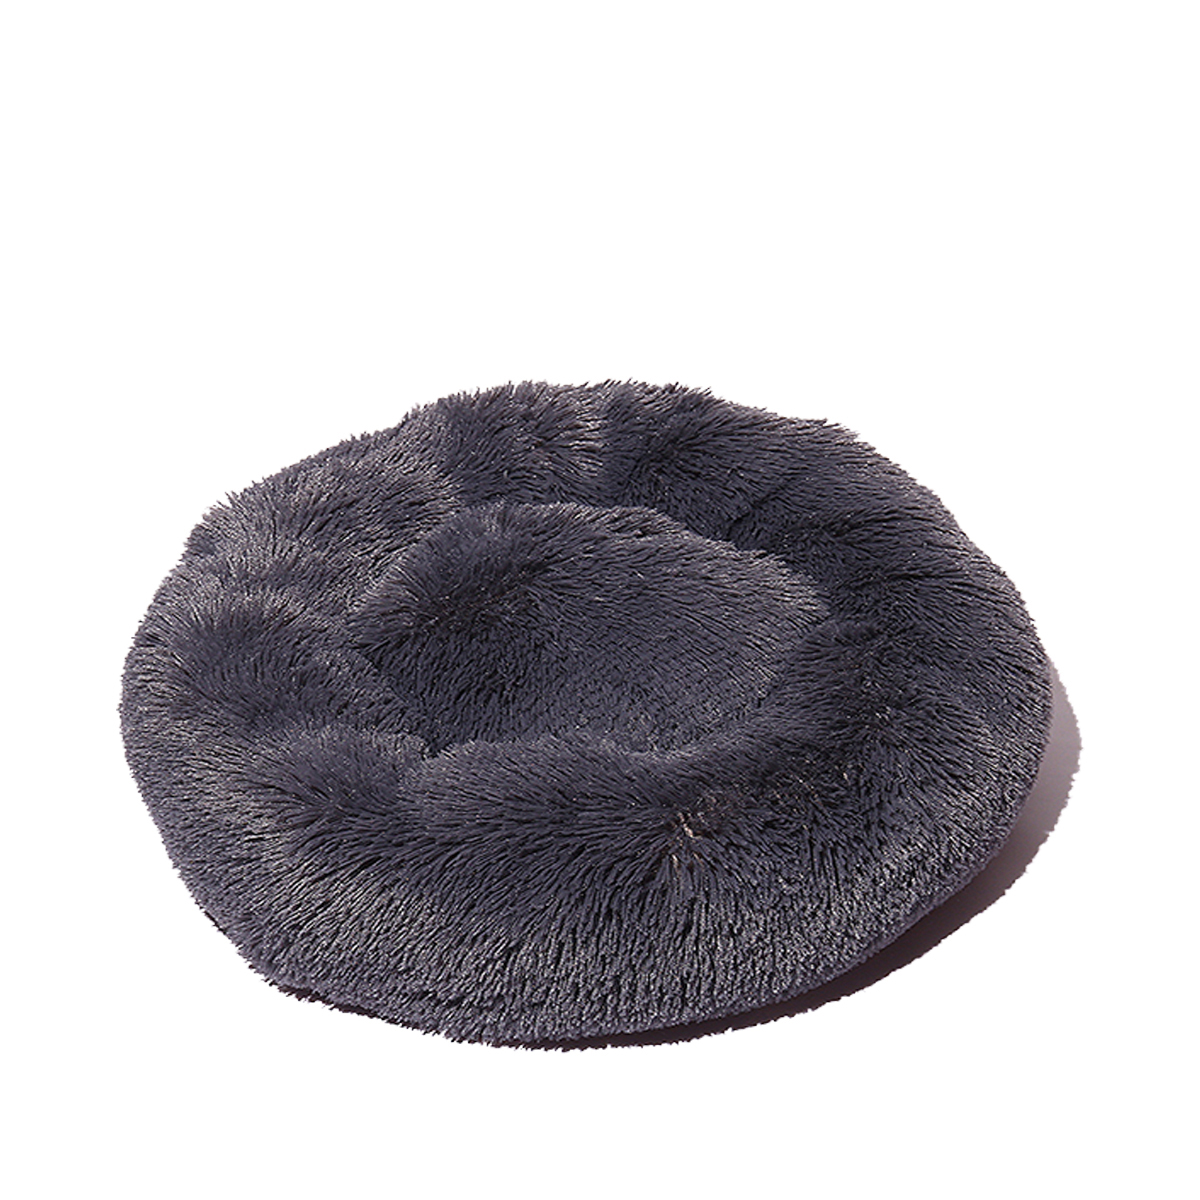 70cm-Plush-Fluffy-Soft-Pet-Bed-for-Cats--Dogs-Calming-Bed-Pad-Soft-Mat-Home-1808936-10